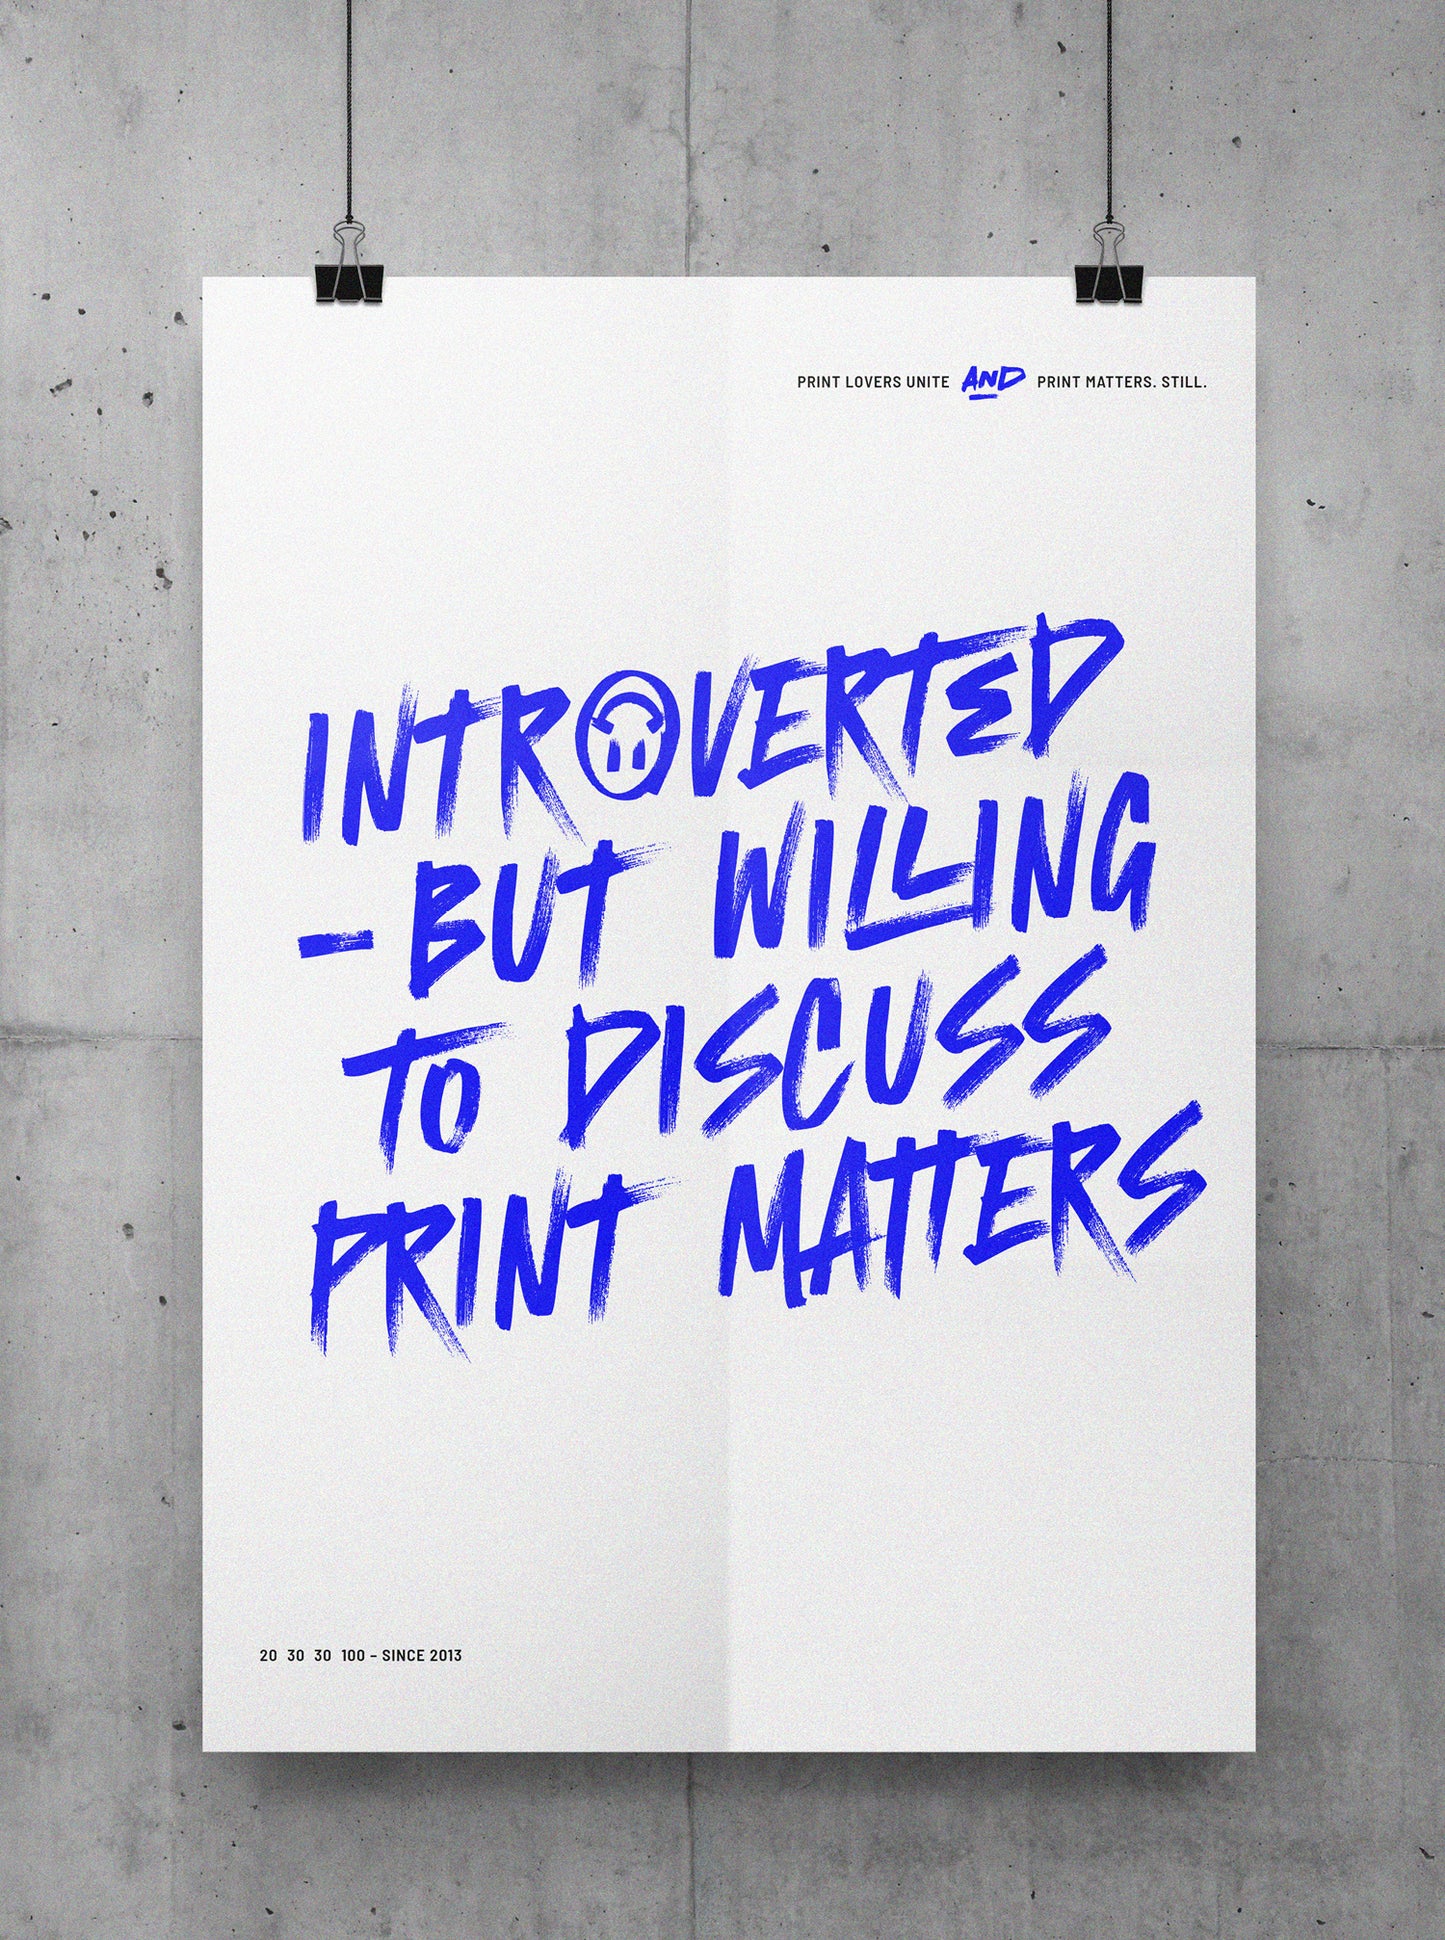 Willing to discuss Print Matters – Introverted